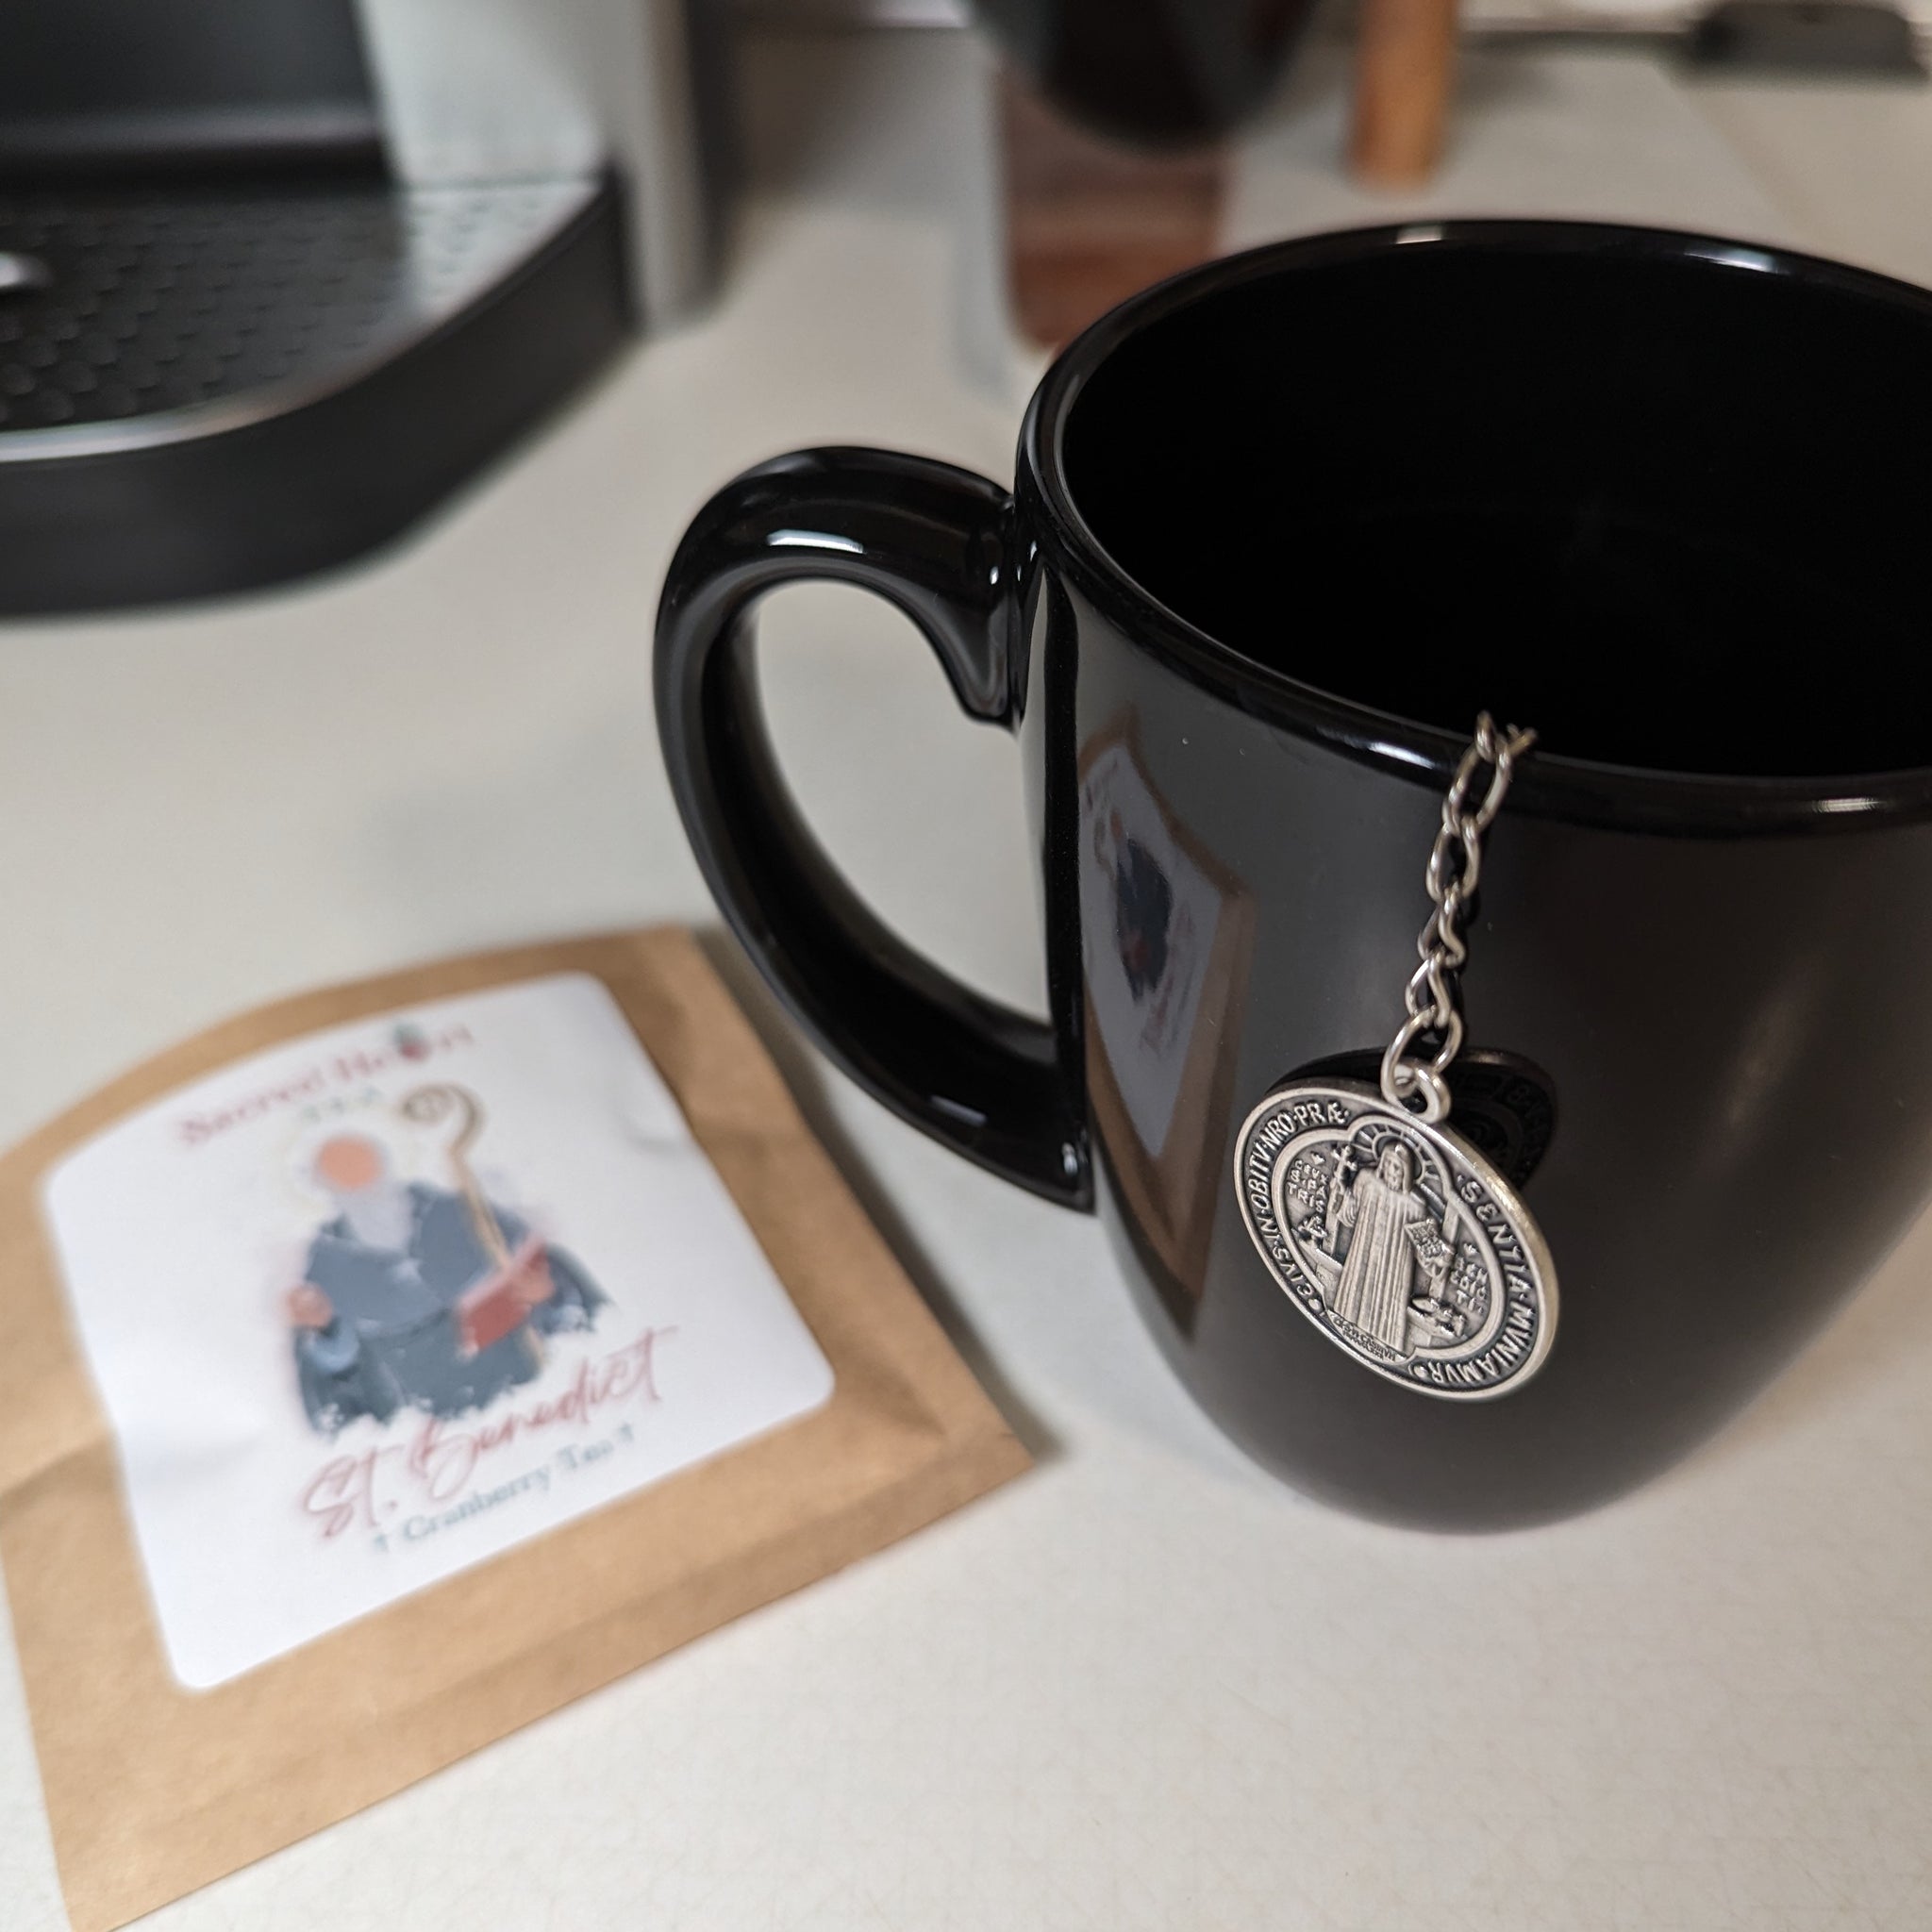 A black mug with a Catholic tea infuser featuring the St. Benedict medal next to St. Benedict loose leaf tea